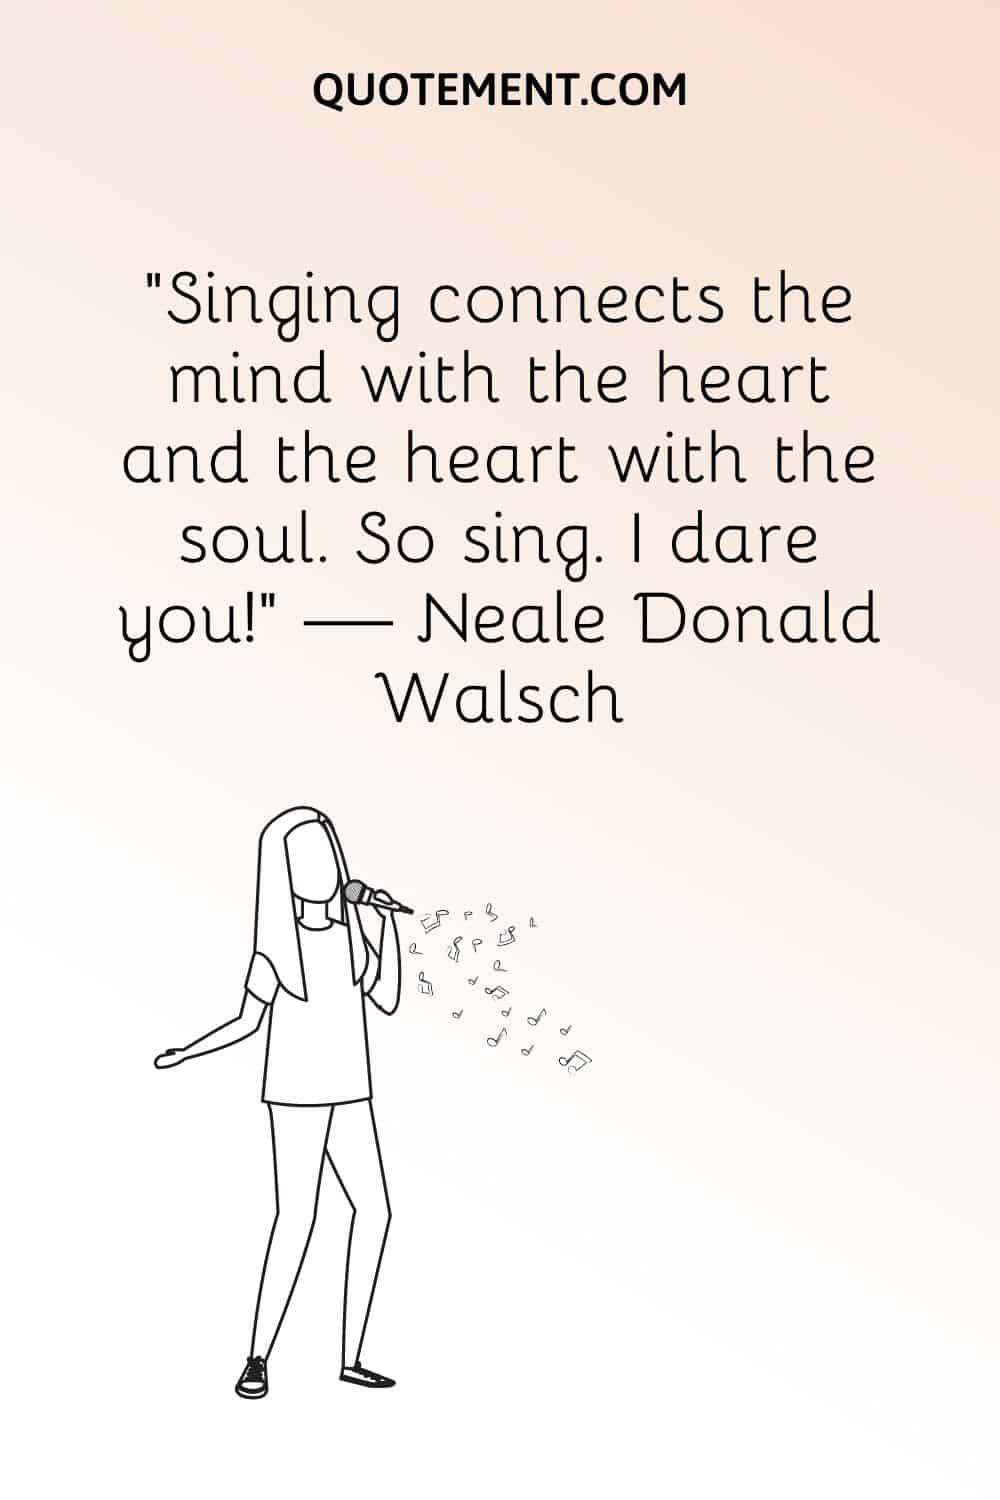 illustration of a woman with a microphone representing singing quote